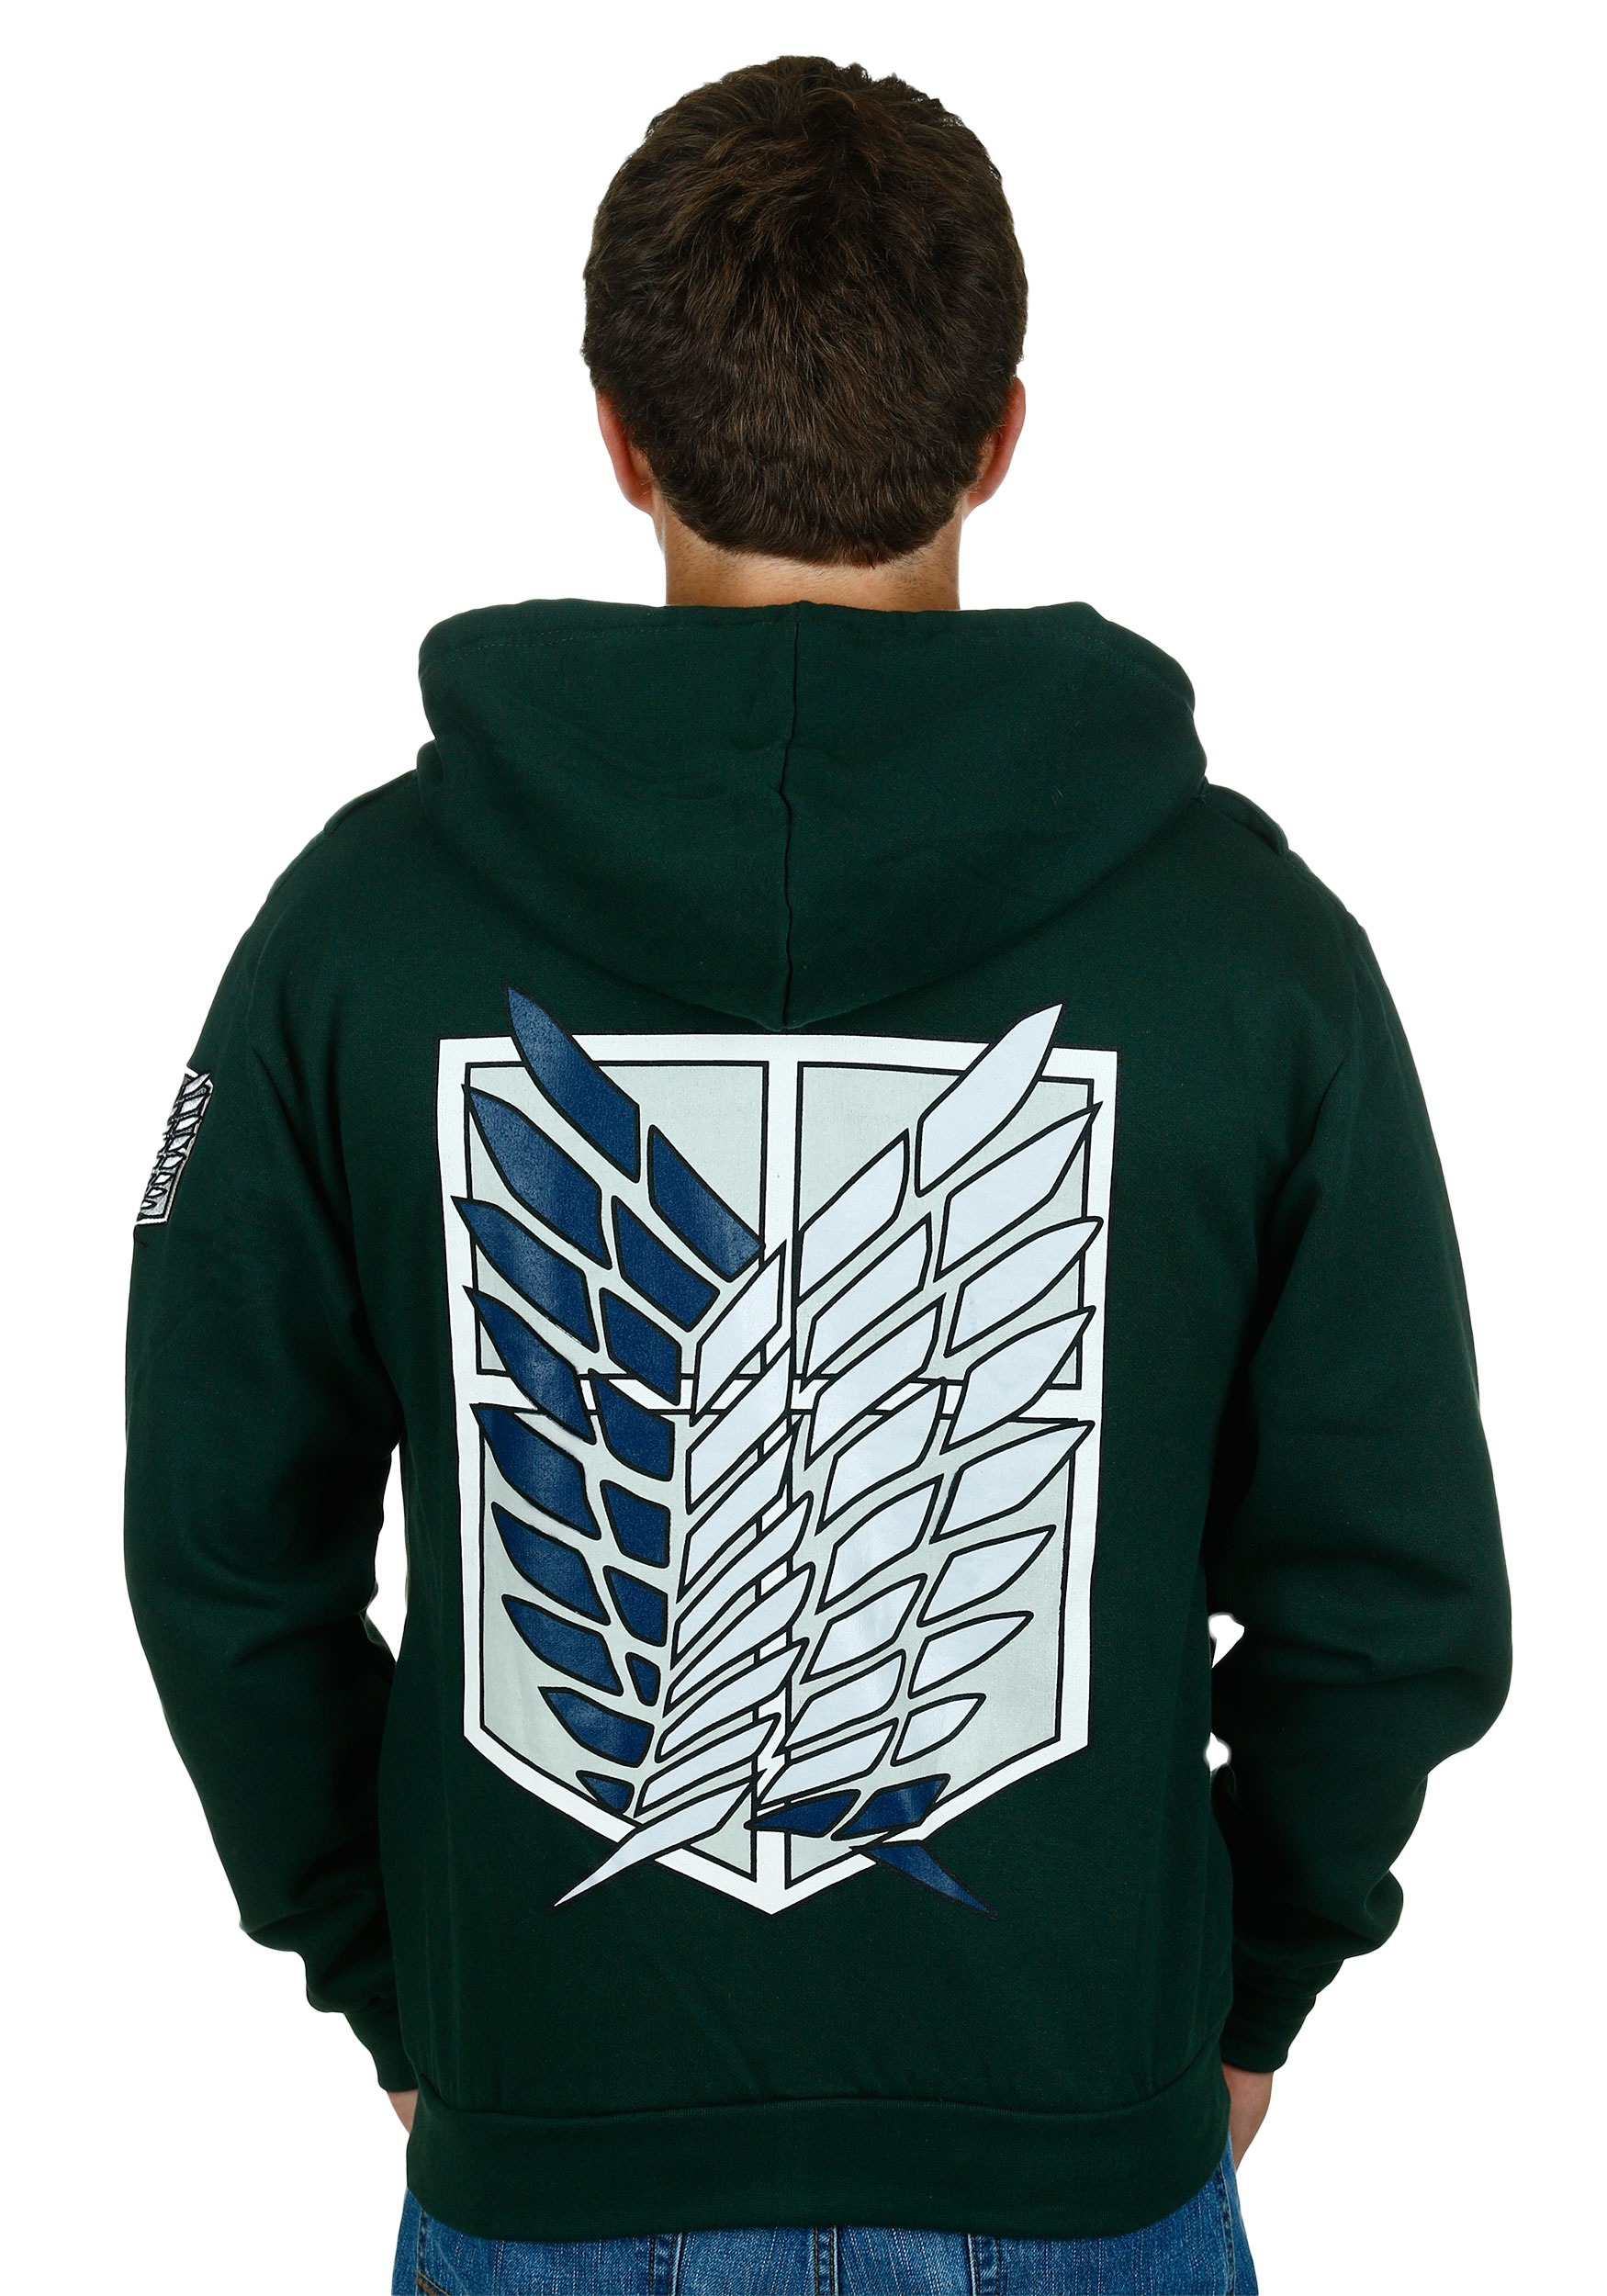 Attack On Titan Scout Regiment Chest Pocket Hoodie Costume